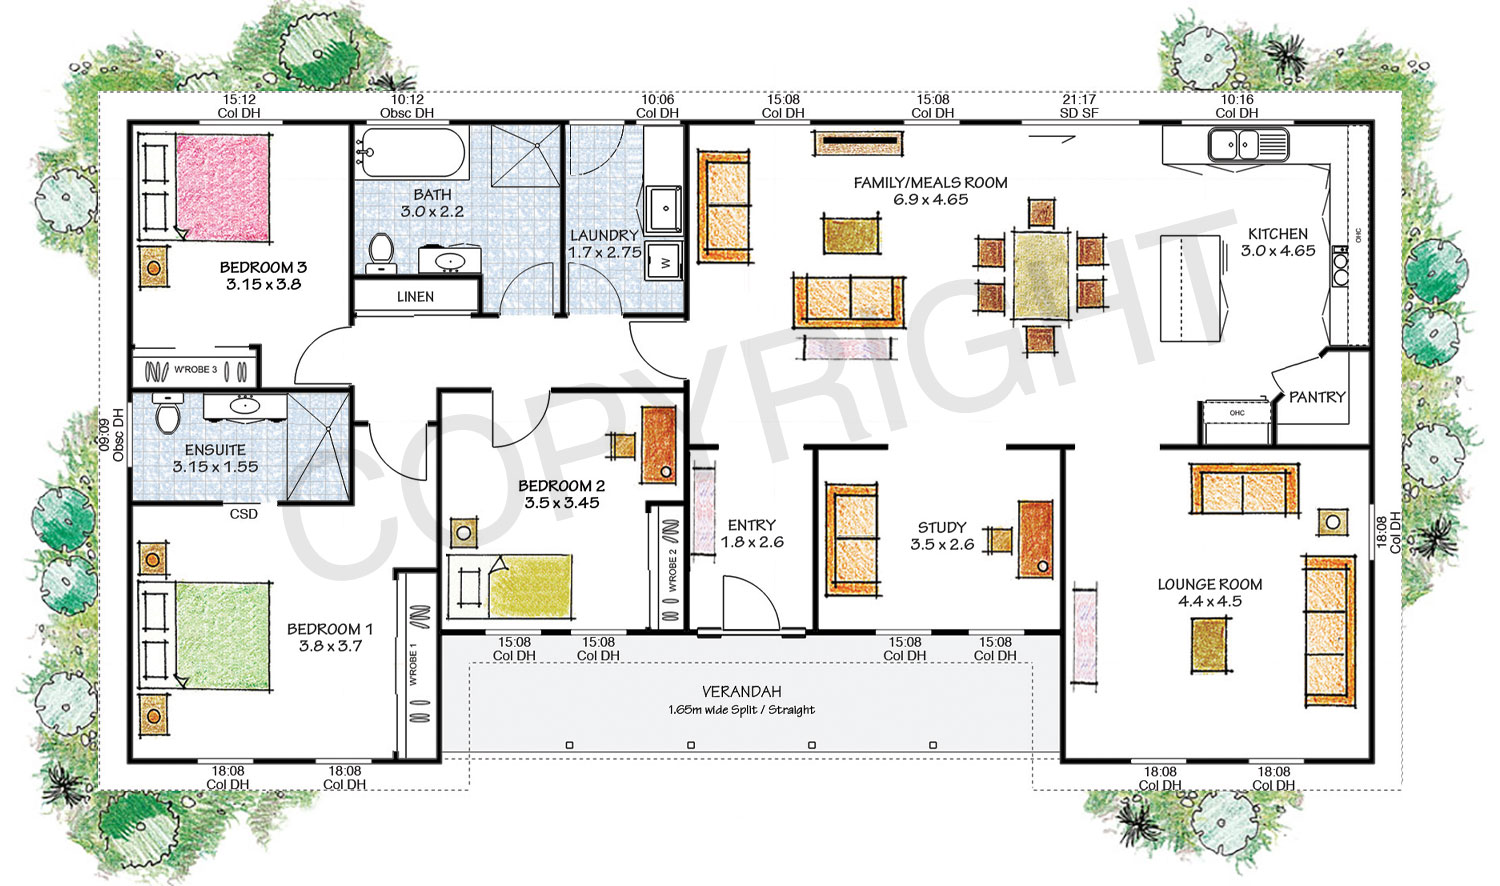 The Patterson floor plan